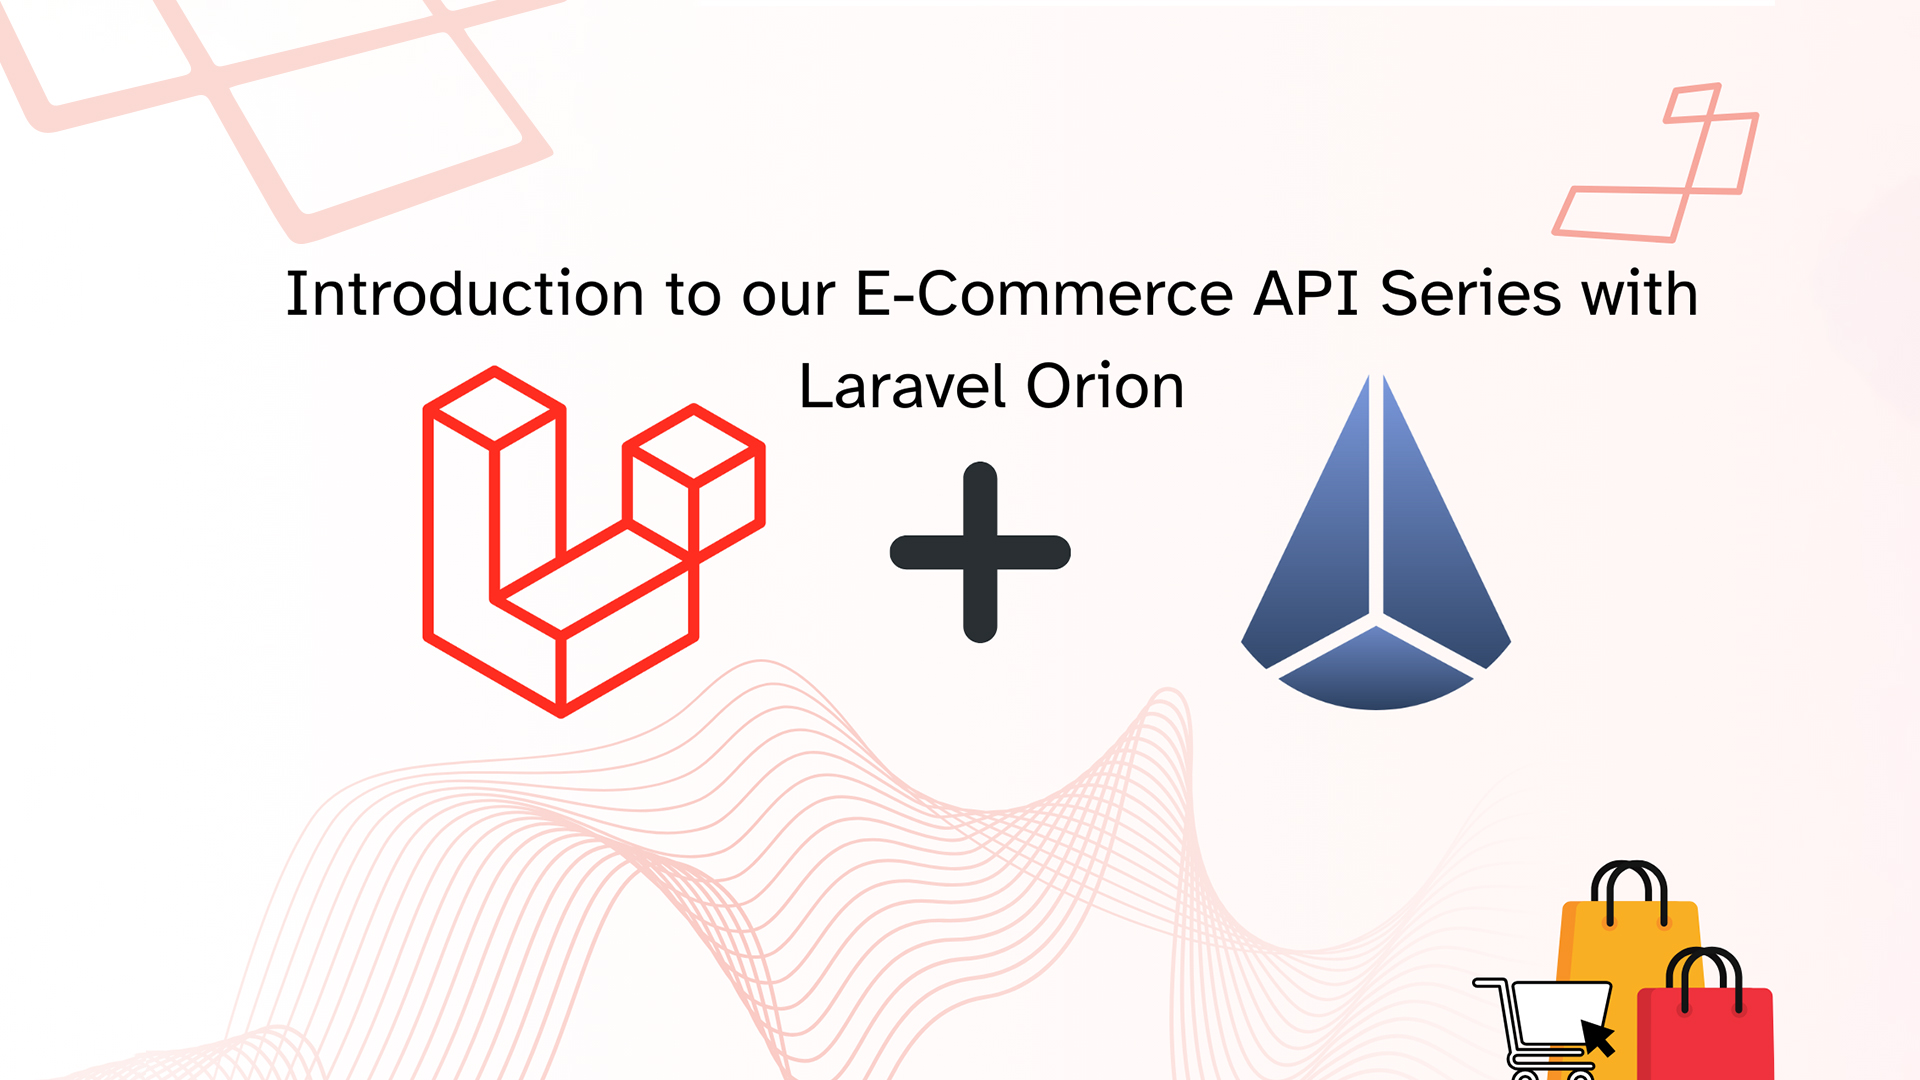 Introduction to our E-Commerce API Series with Laravel Orion